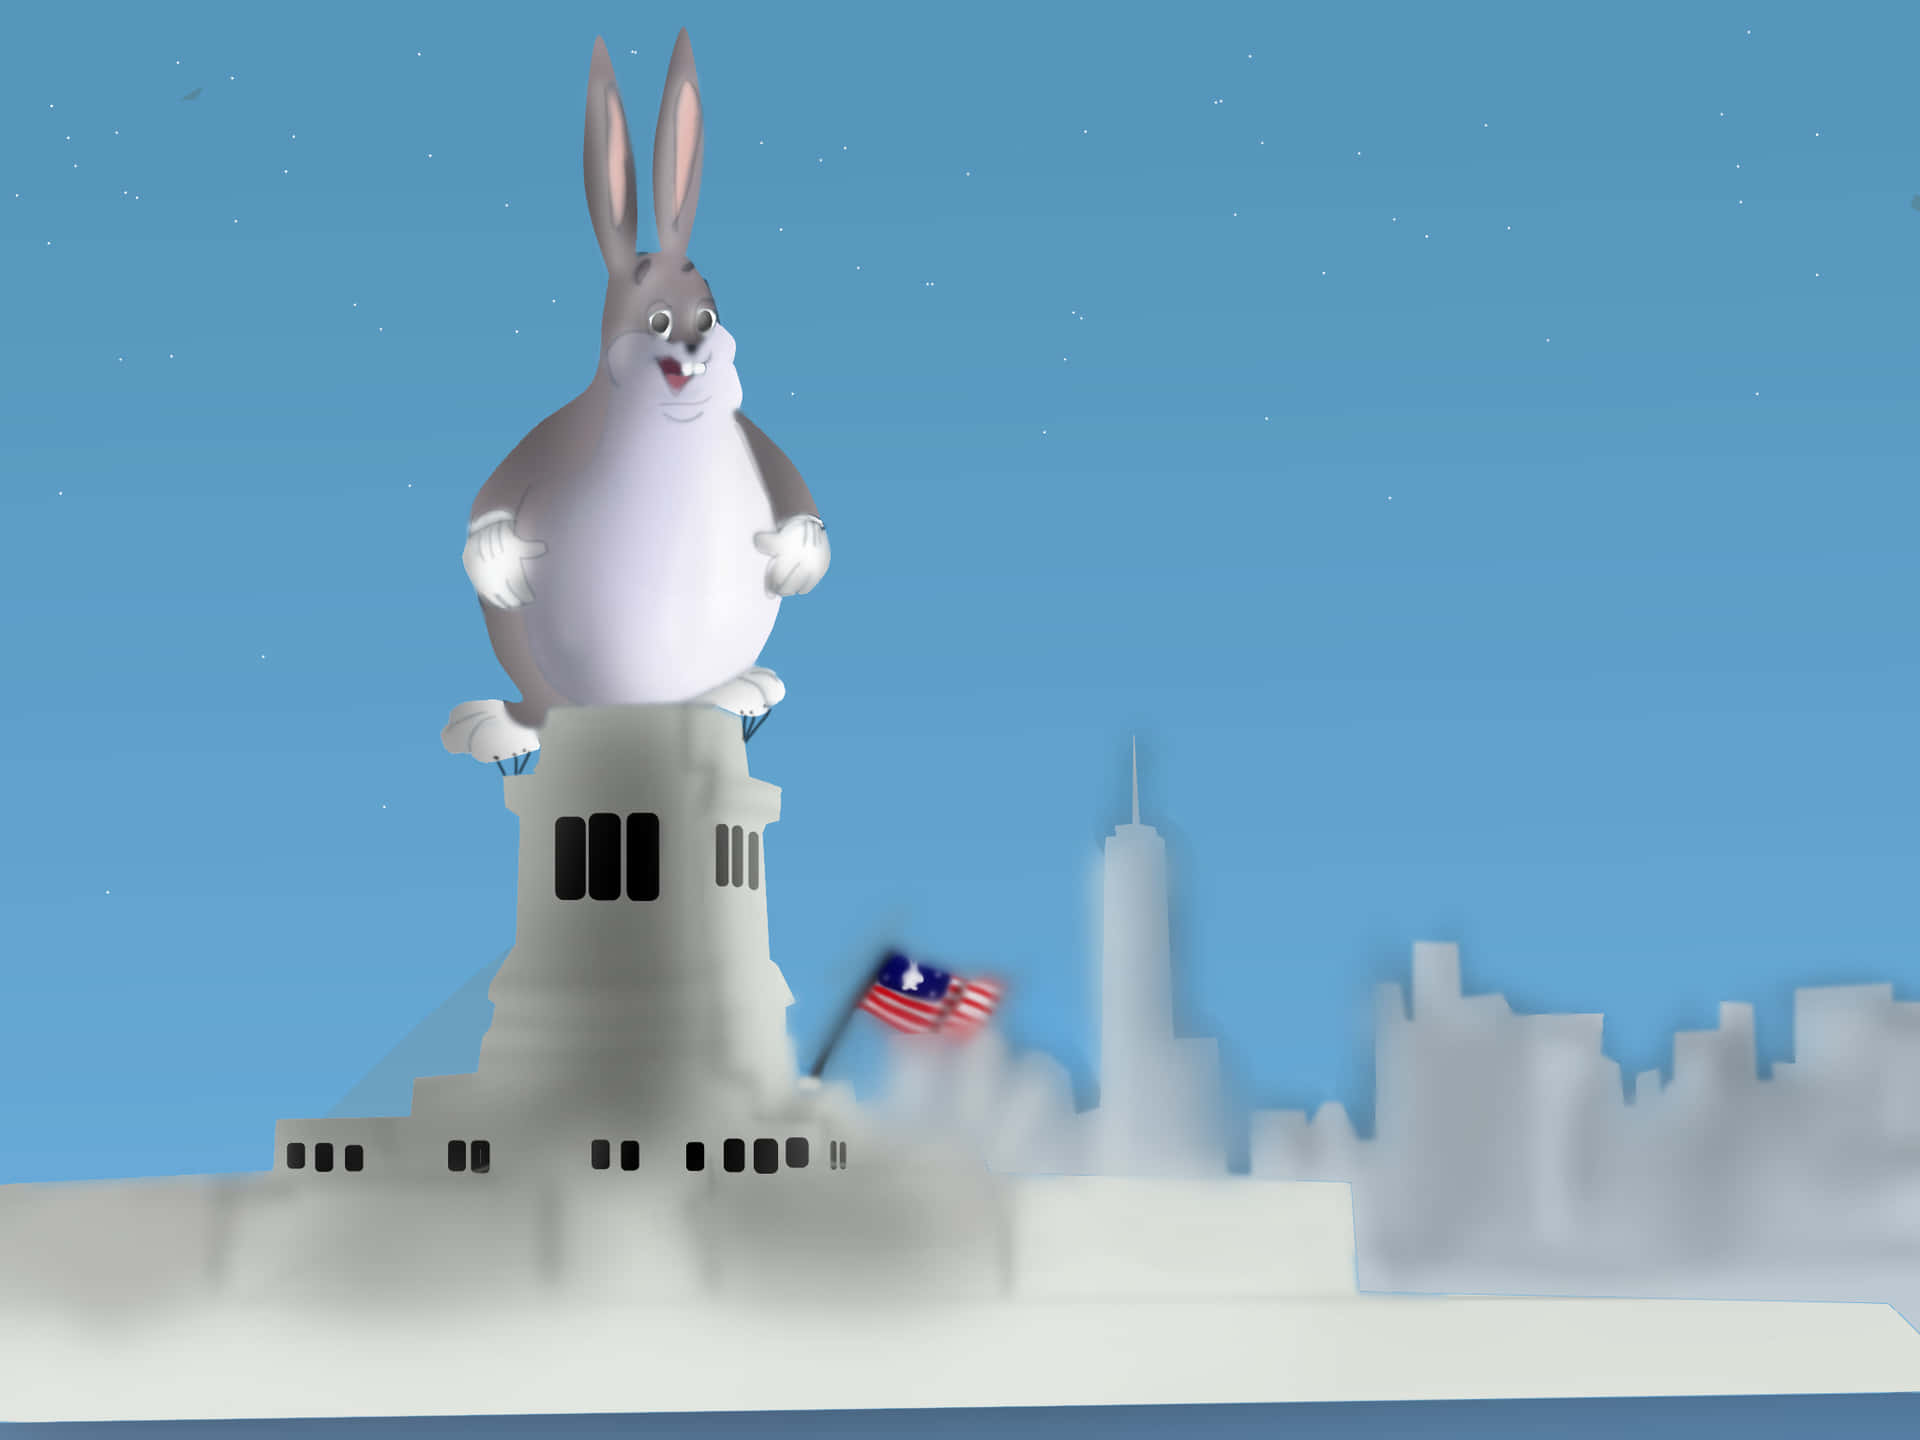 Big Chungus, The Biggest And Funniest Cartoon Bunny In The World